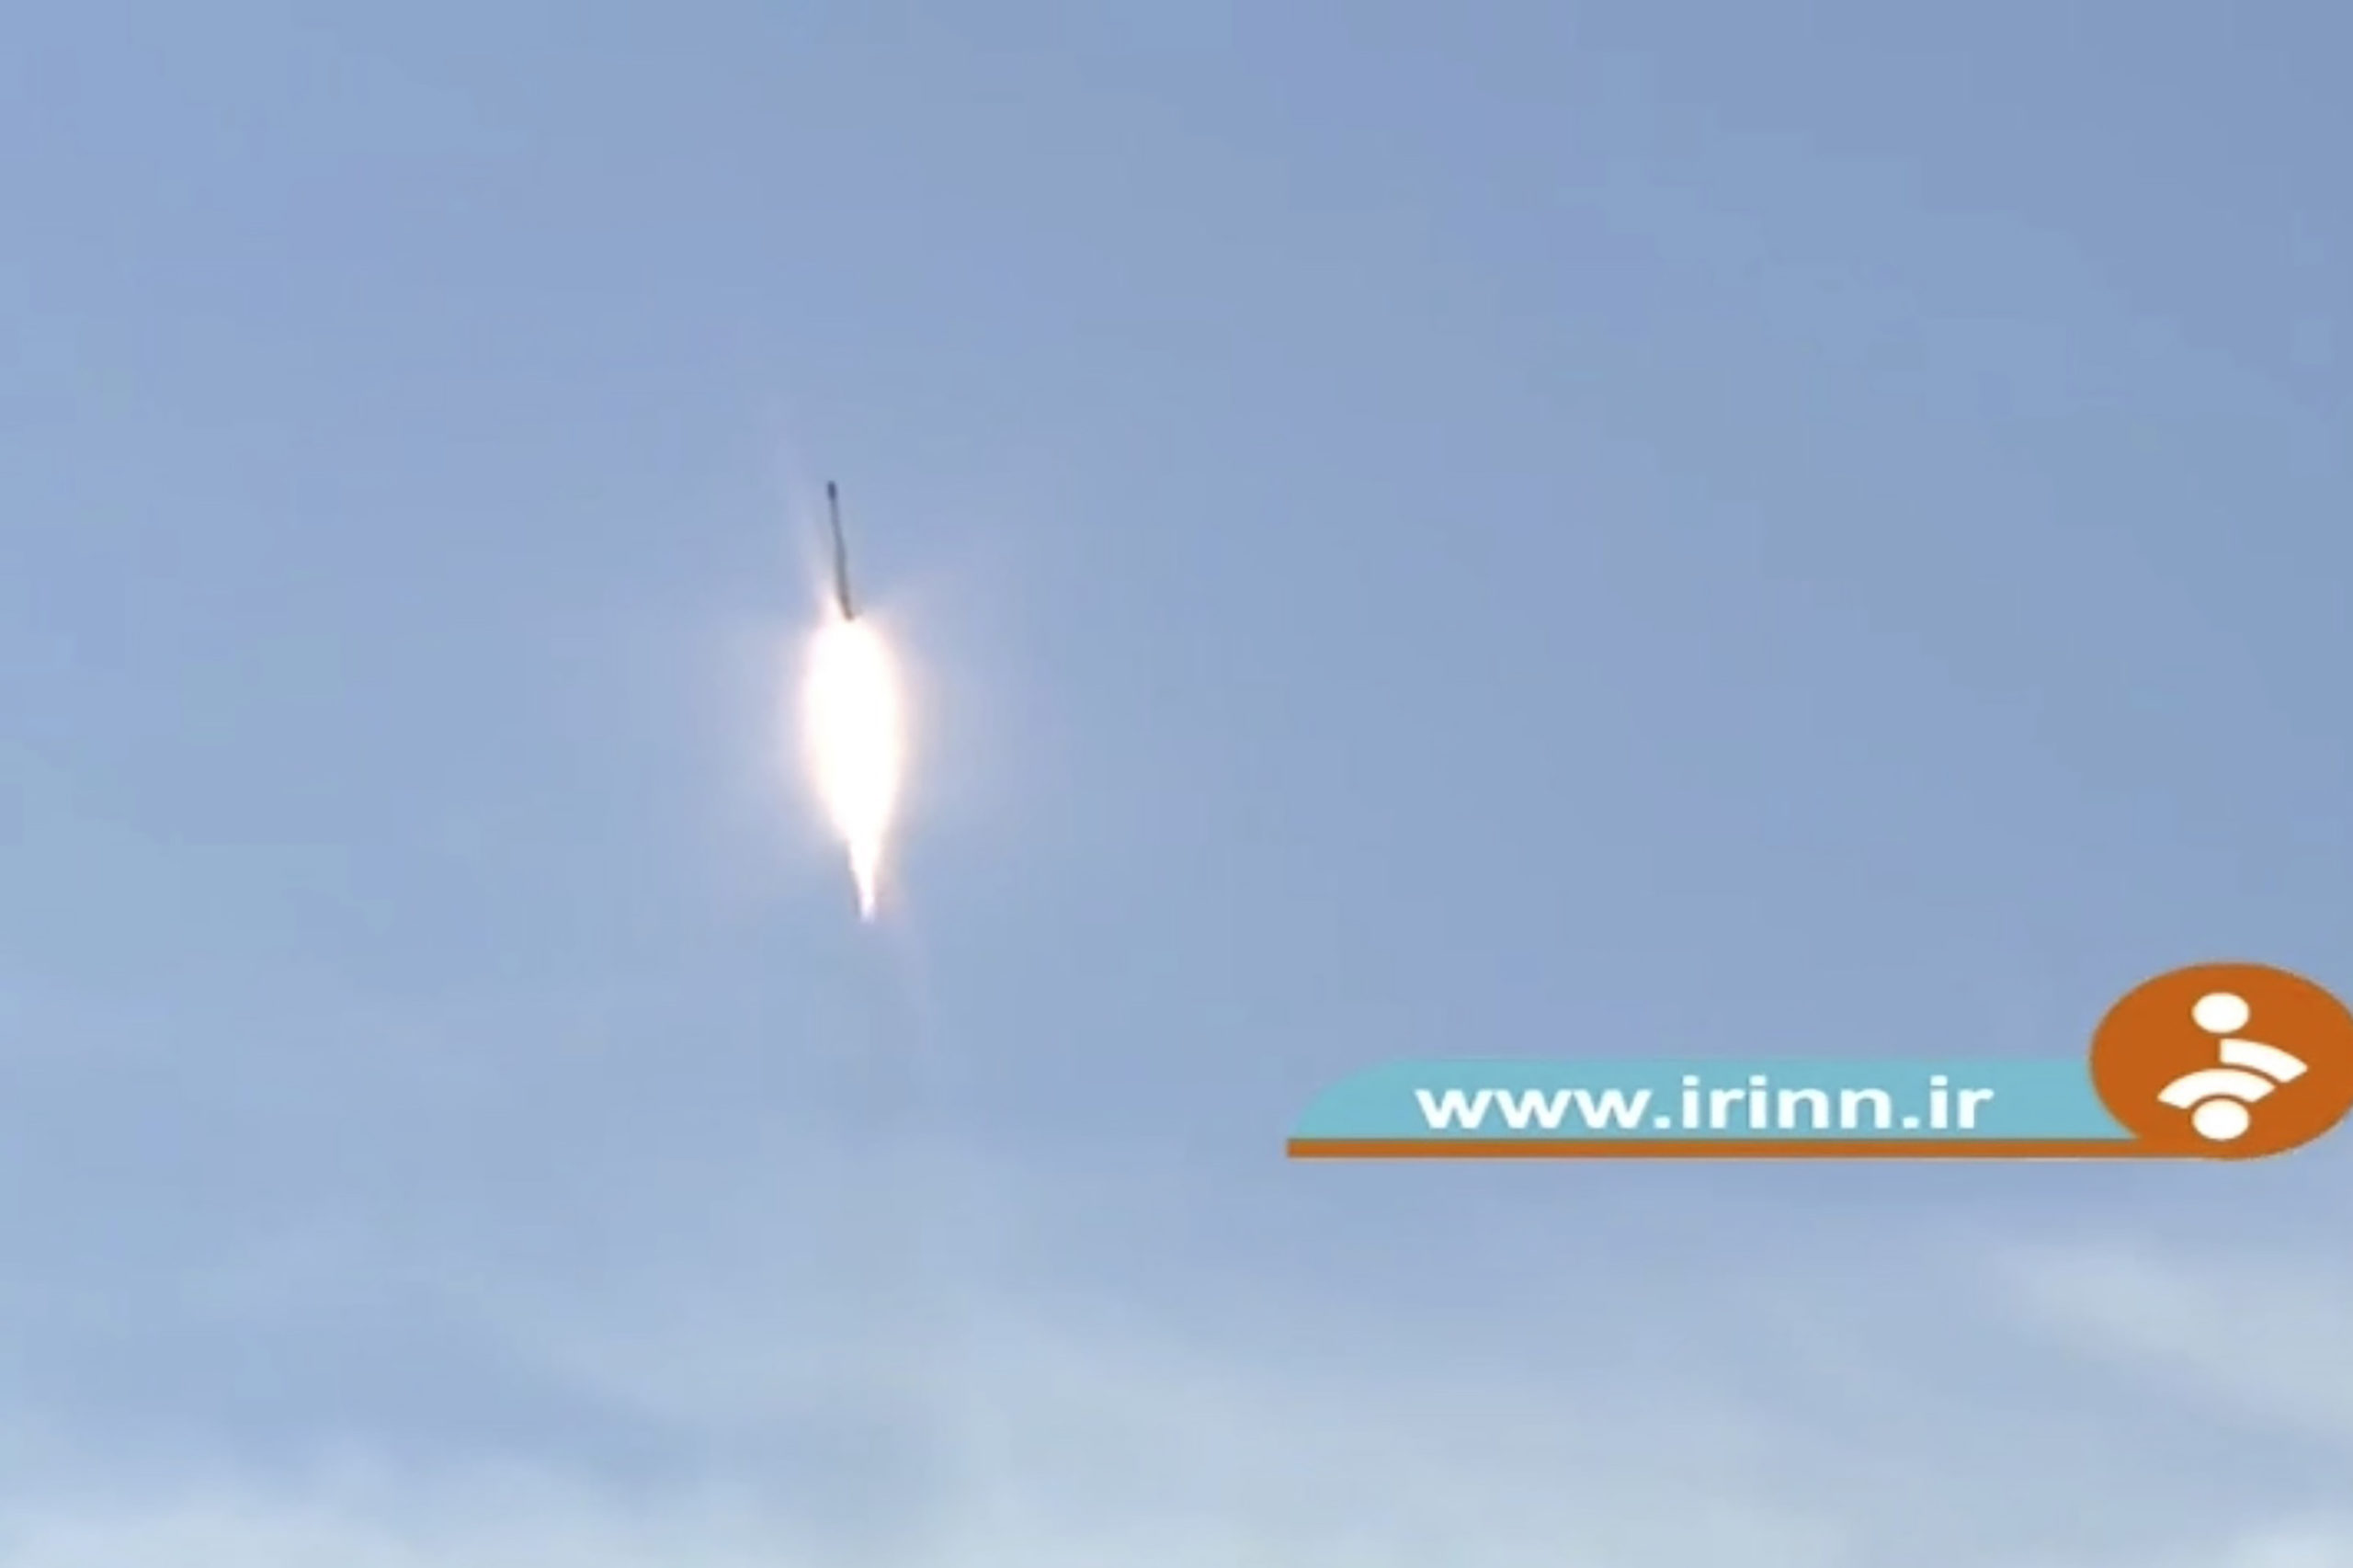 Iran announced Thursday it launched a satellite carrier rocket, seen here in an image taken from video footage aired by Iranian state television.